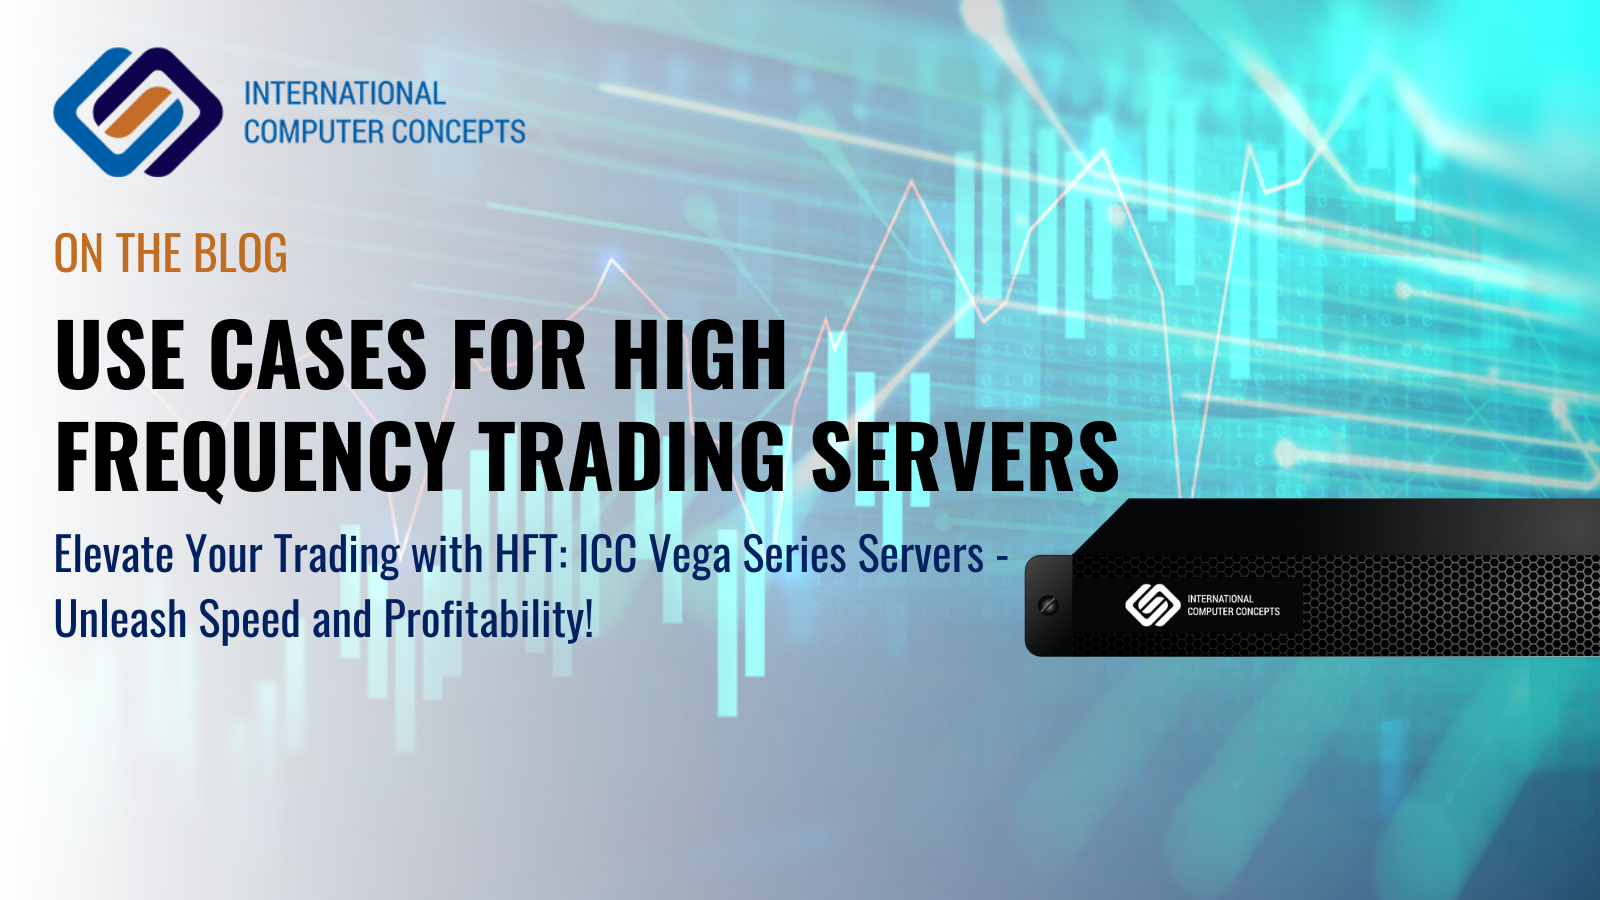 Use cases for High Frequency Trading Servers